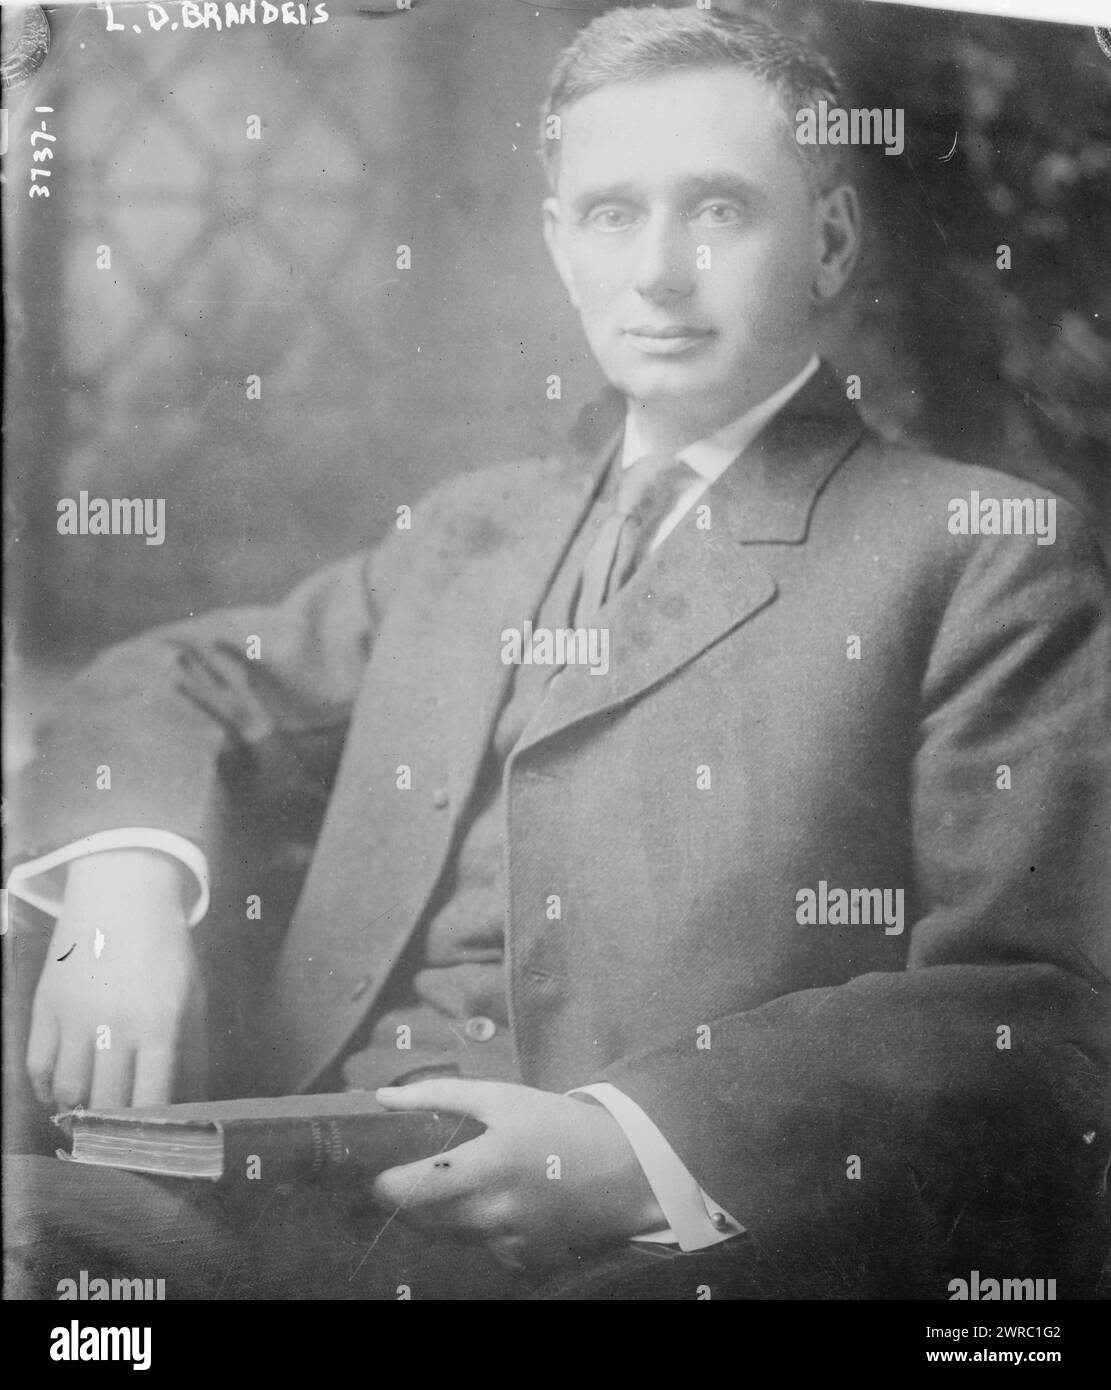 L.D. Brandeis, Photograph shows Louis Dembitz Brandeis, an American lawyer and Associate Justice of the U.S. Supreme Court., between ca. 1910 and ca. 1920, Glass negatives, 1 negative: glass Stock Photo